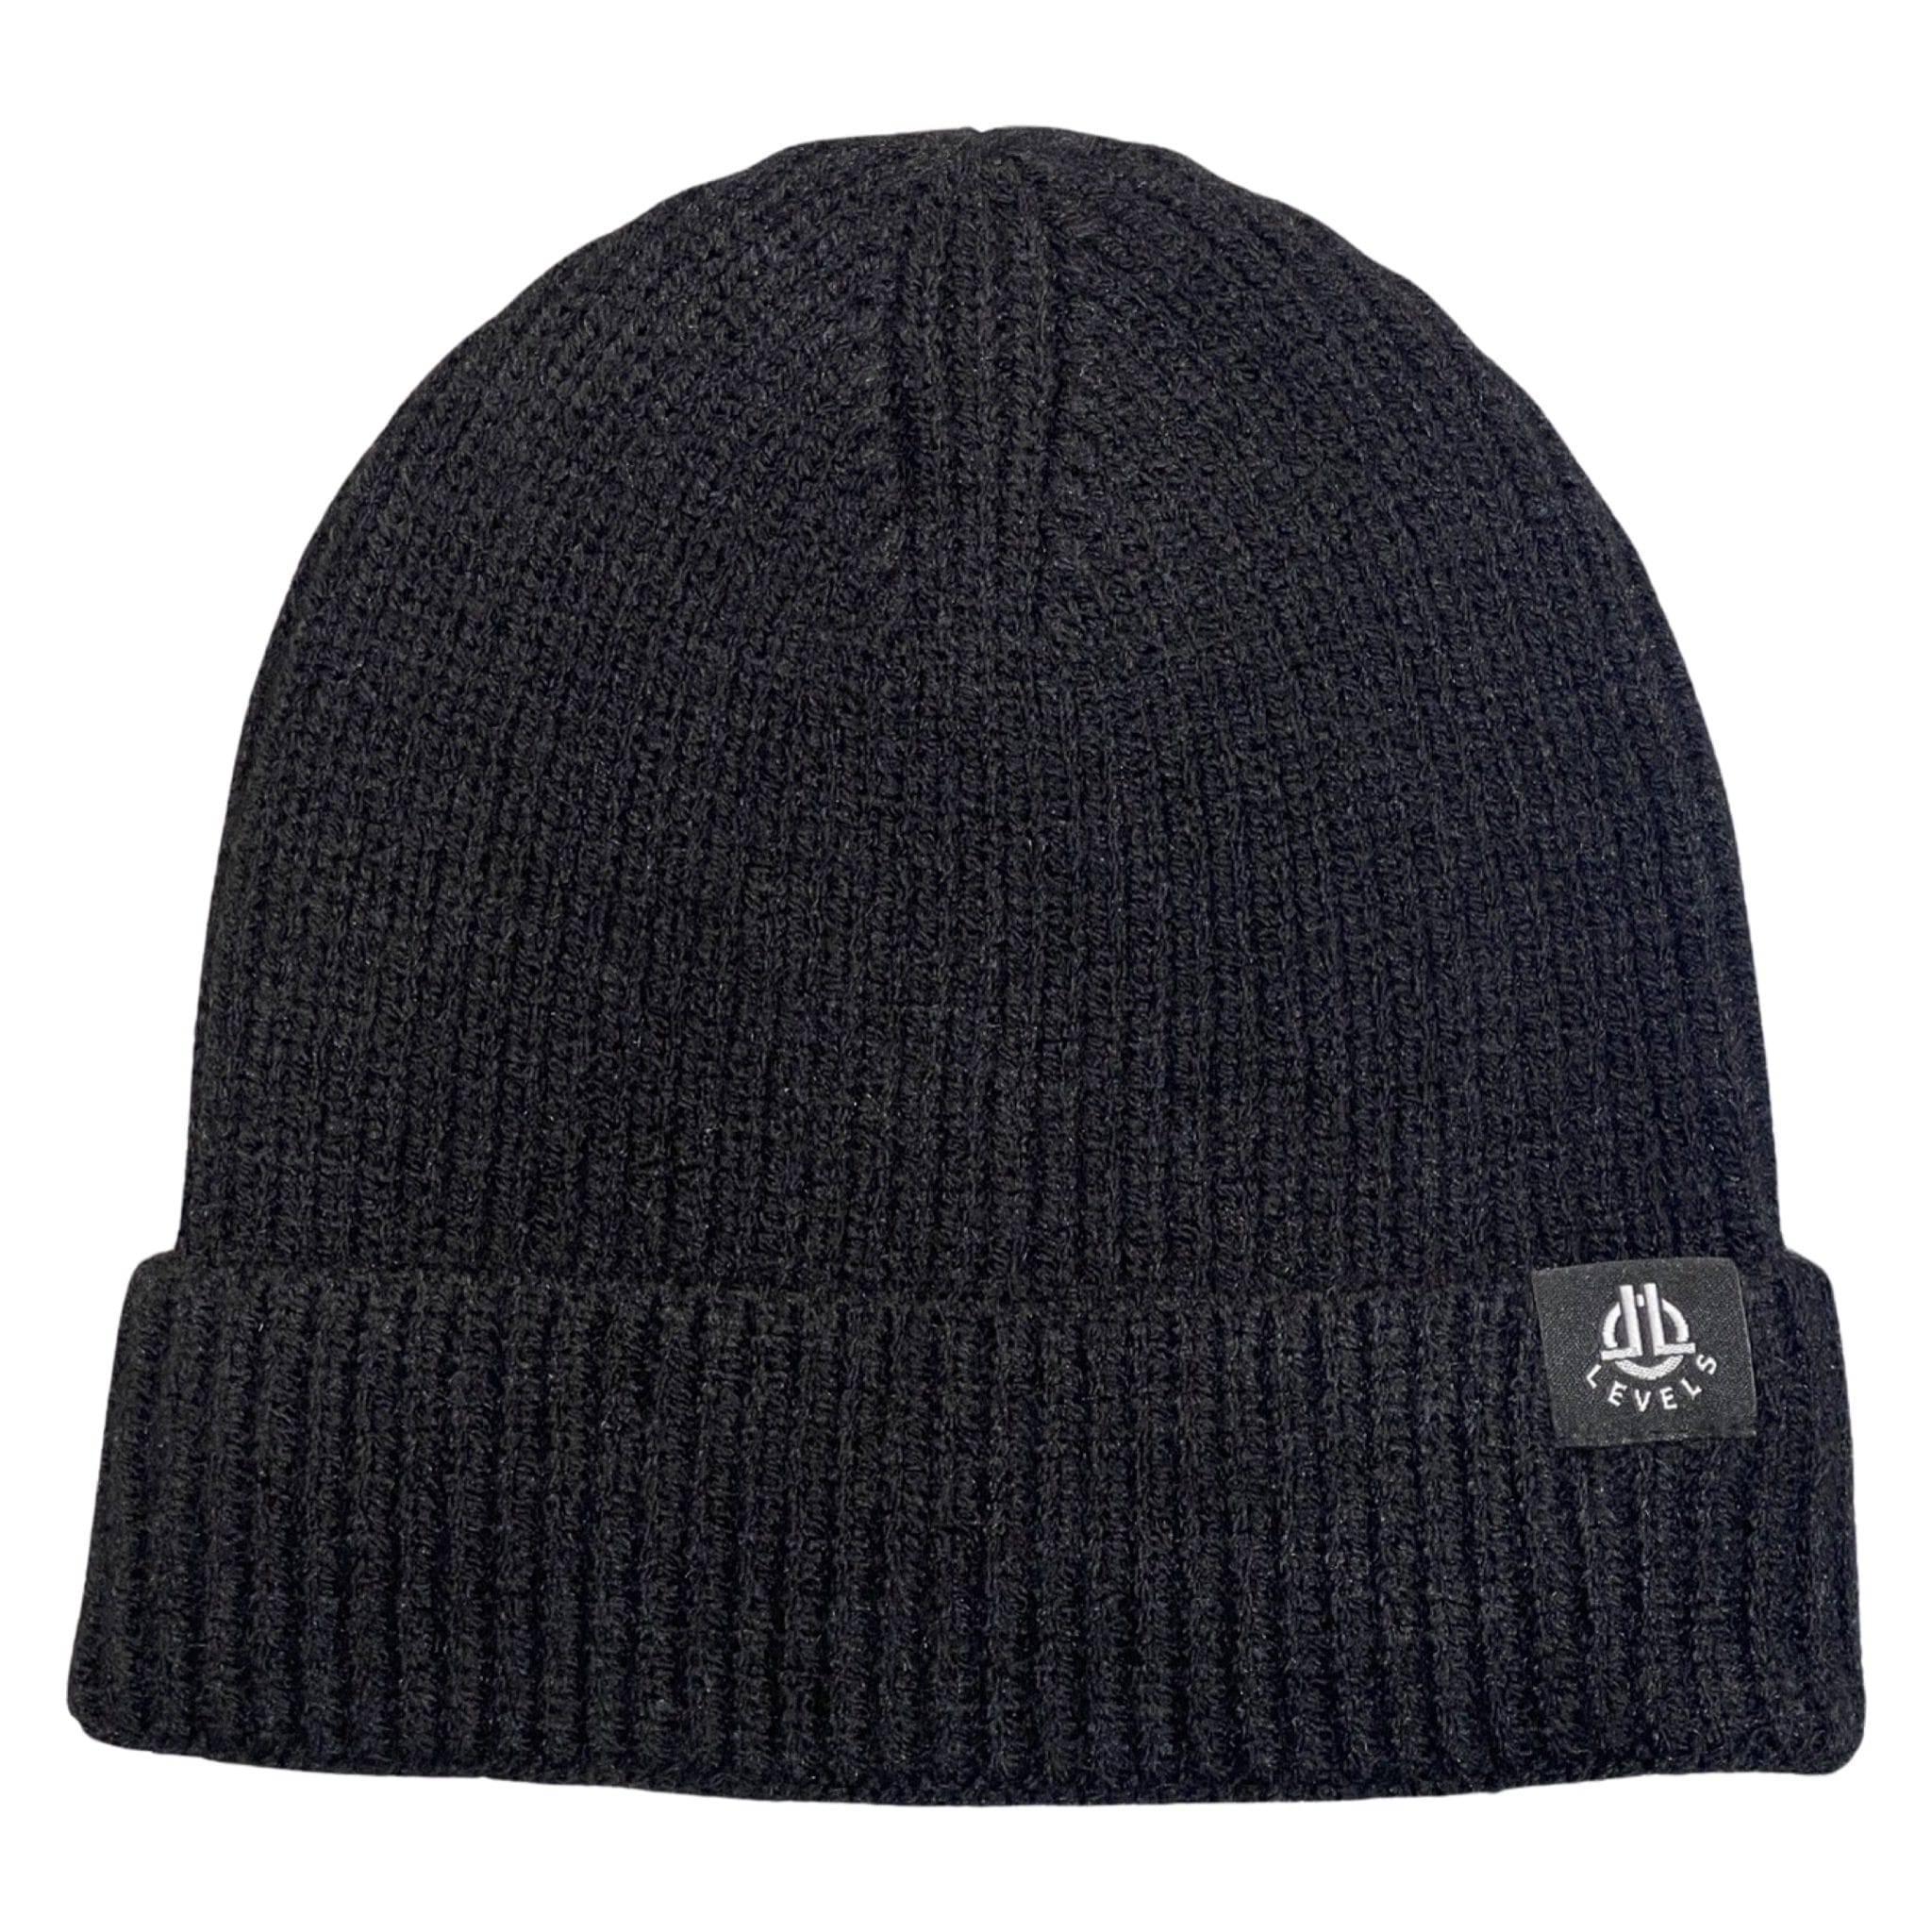 Levels L.L.C. Apparel & Accessories LEVELS PREMIUM KNIT RIBBED BEANIE (AYSIA COLLECTION)